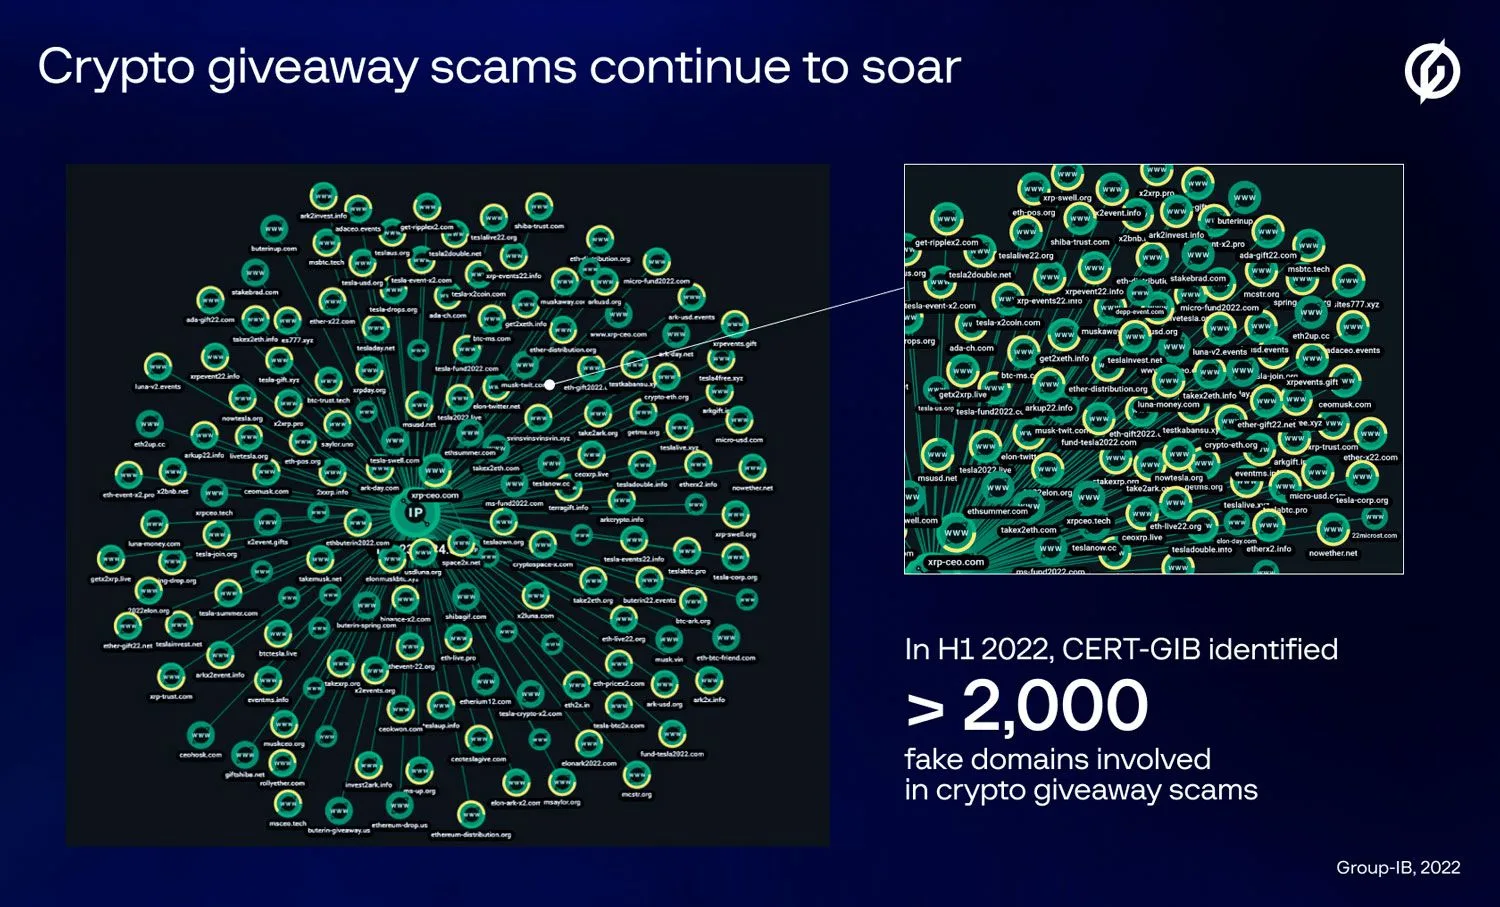 Number of domains used for crypto giveaway scams